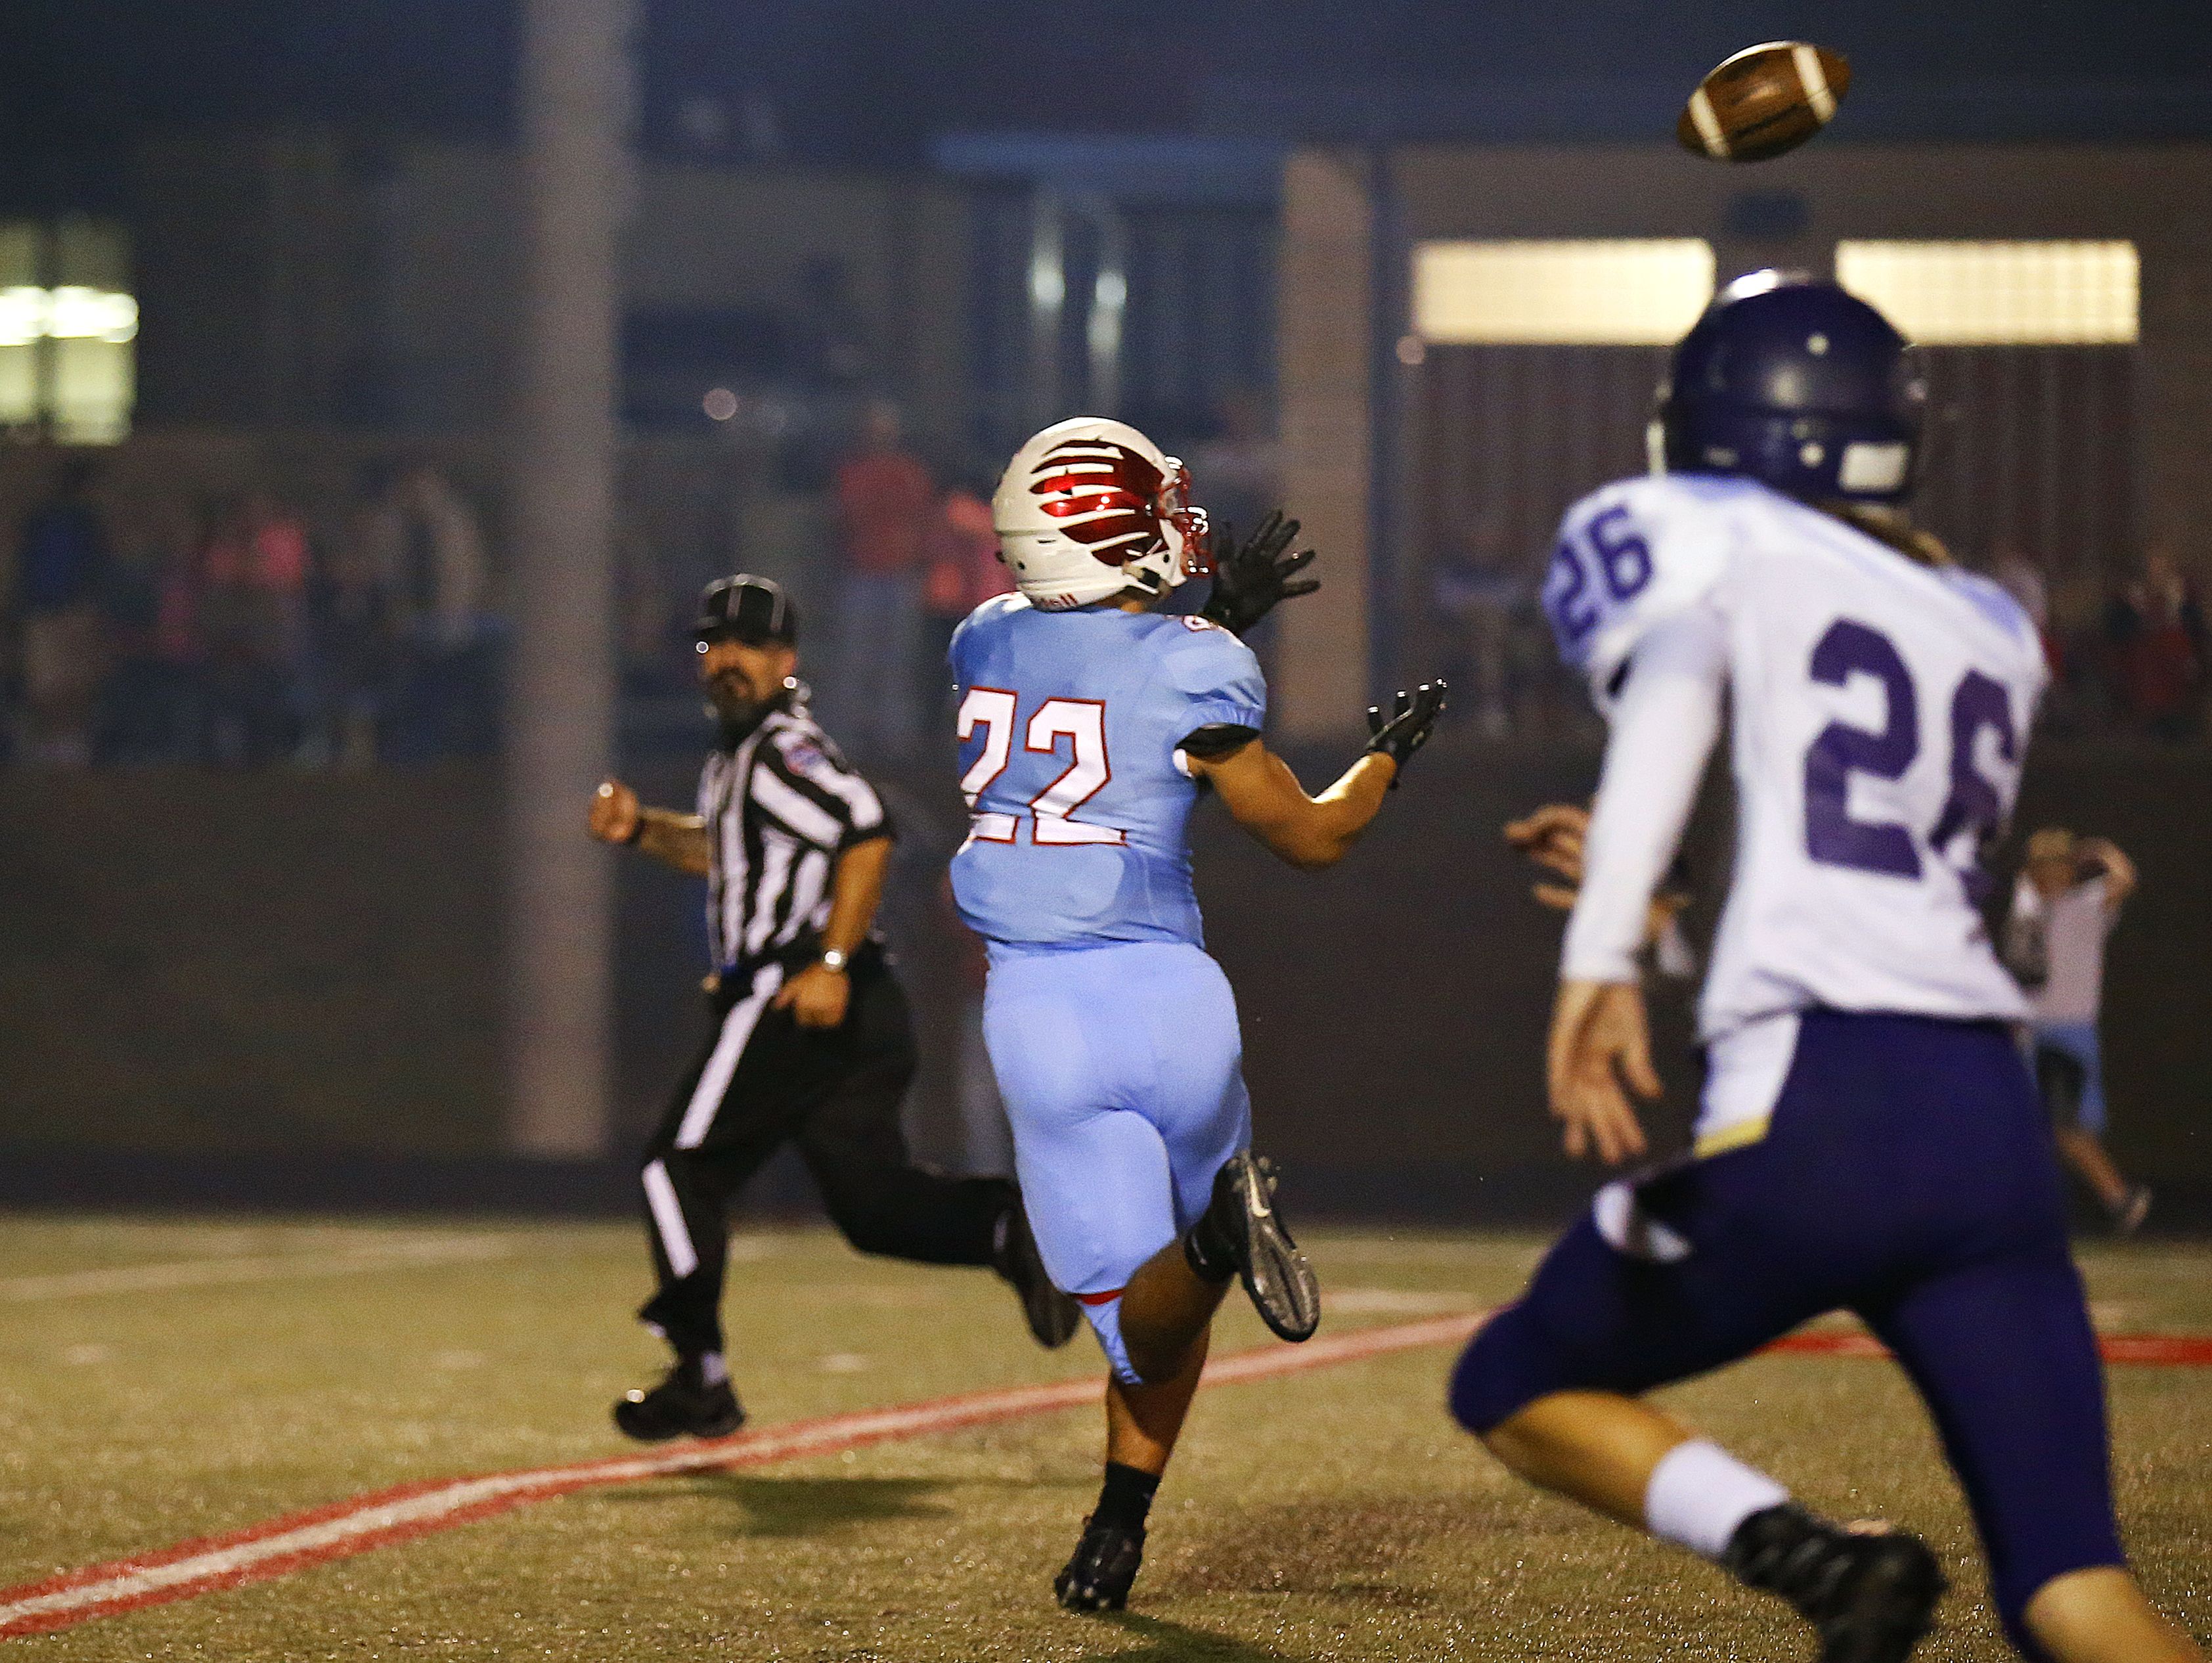 Glendale High School wide receiver Luke Montgomery (22) catches a long touchdown pass by quarterback Alex Houston (not pictured) during first quarter action of the game between Glendale High School and Camdenton High School at Lowe Stadium in Springfield, Mo. on Oct. 14, 2016. The Glendale Falcons won the game 63-35.